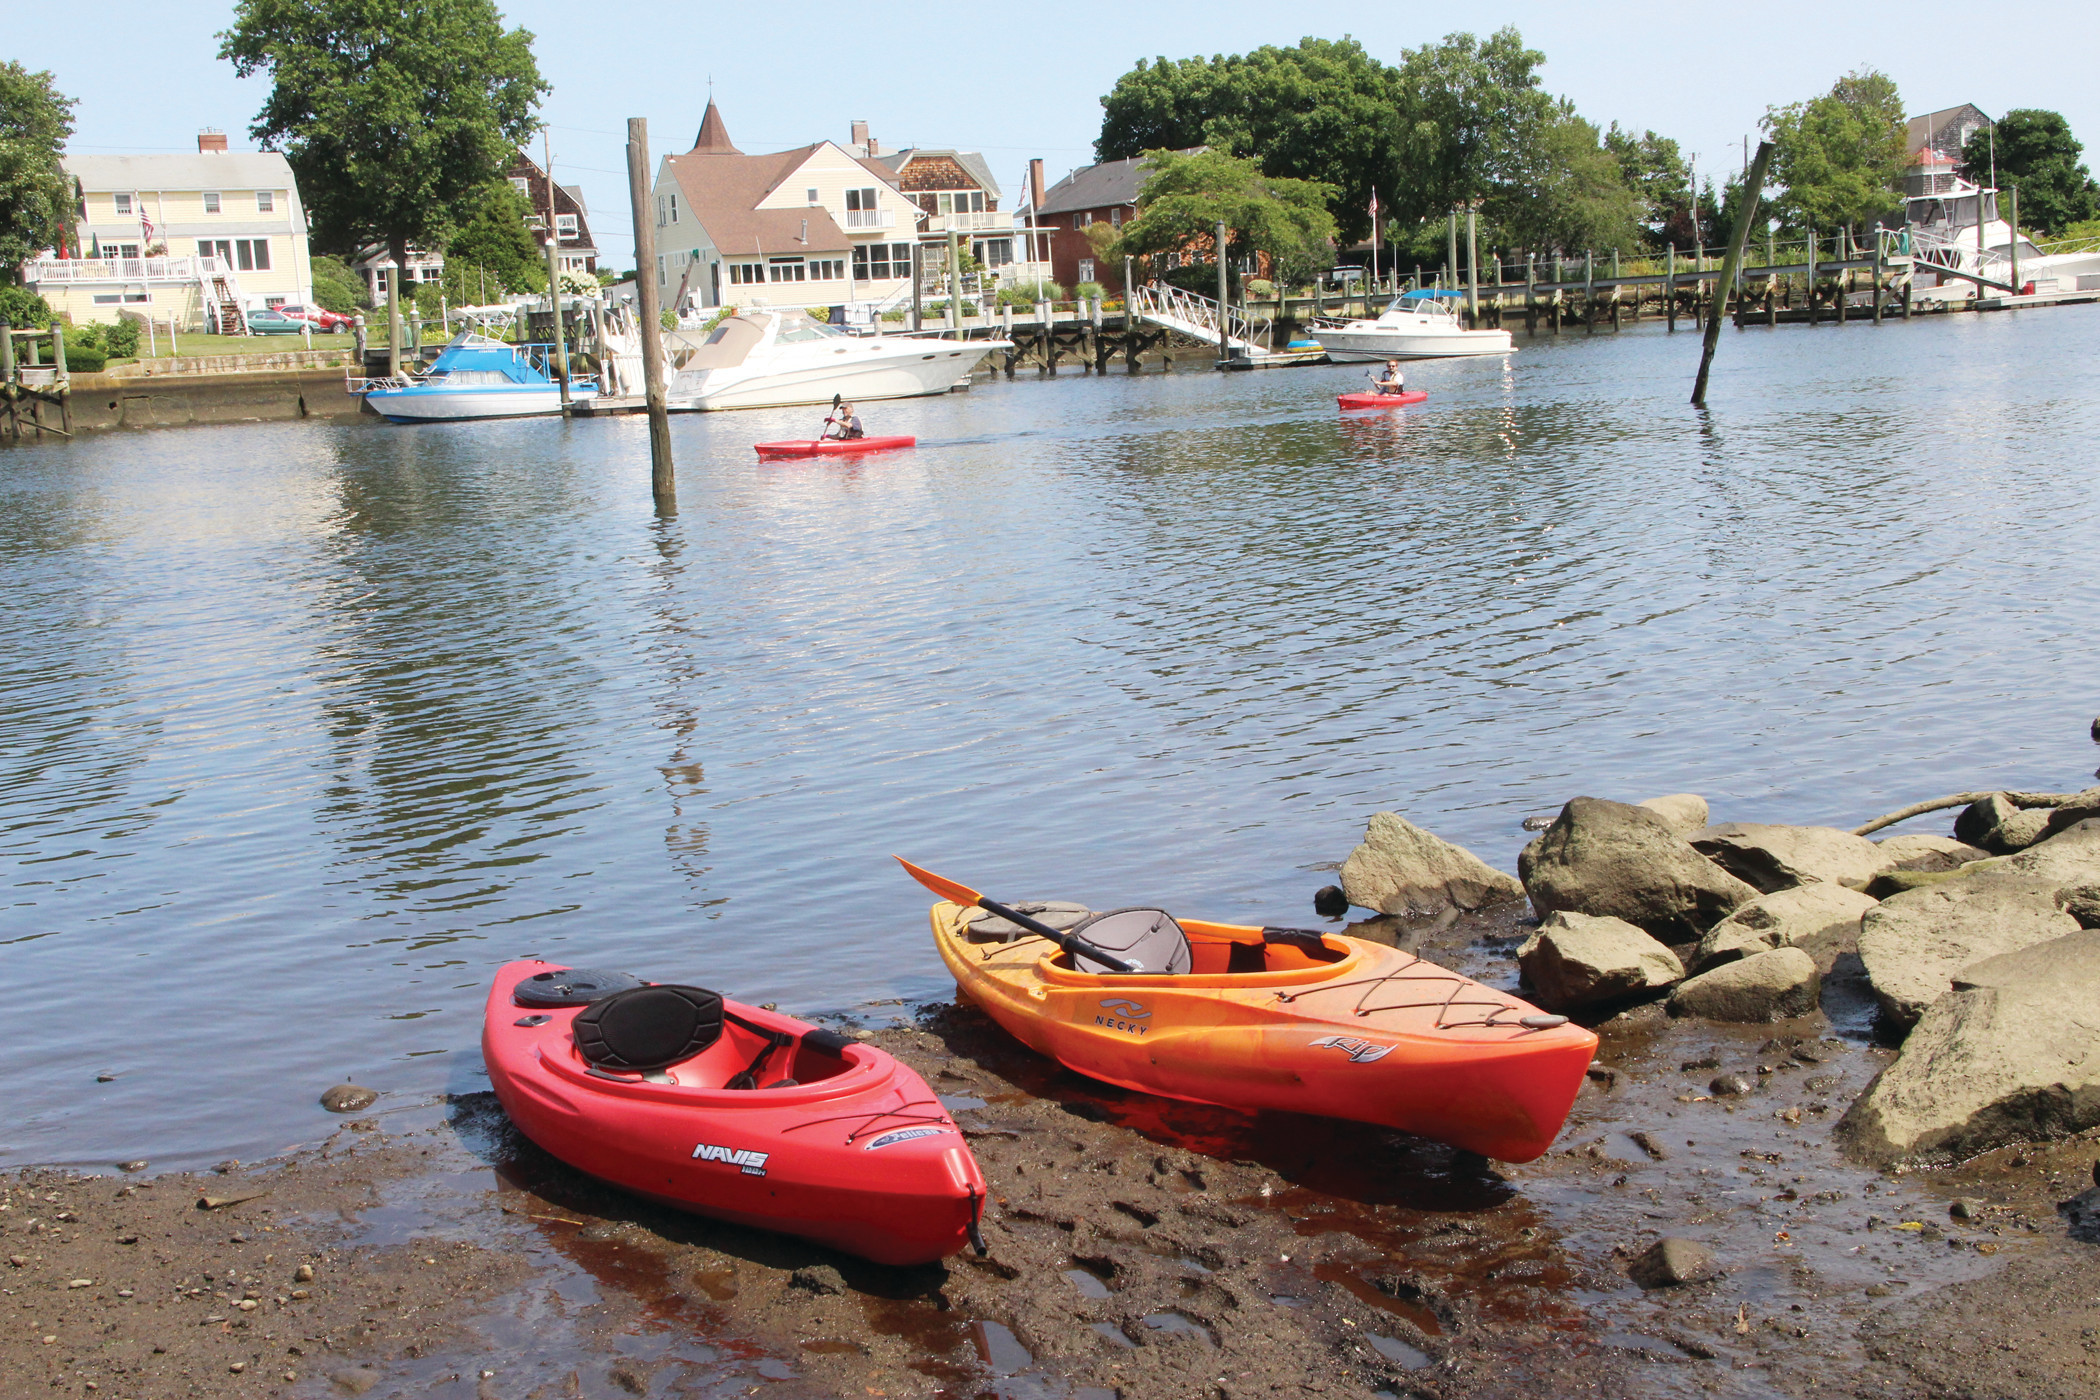 VILLAGE BEAT: A Sunday stroll through Pawtuxet Village found an active community with live music at the Pawtuxet Athletic Club, a birthday at Aspray Boathouse and people on the water.